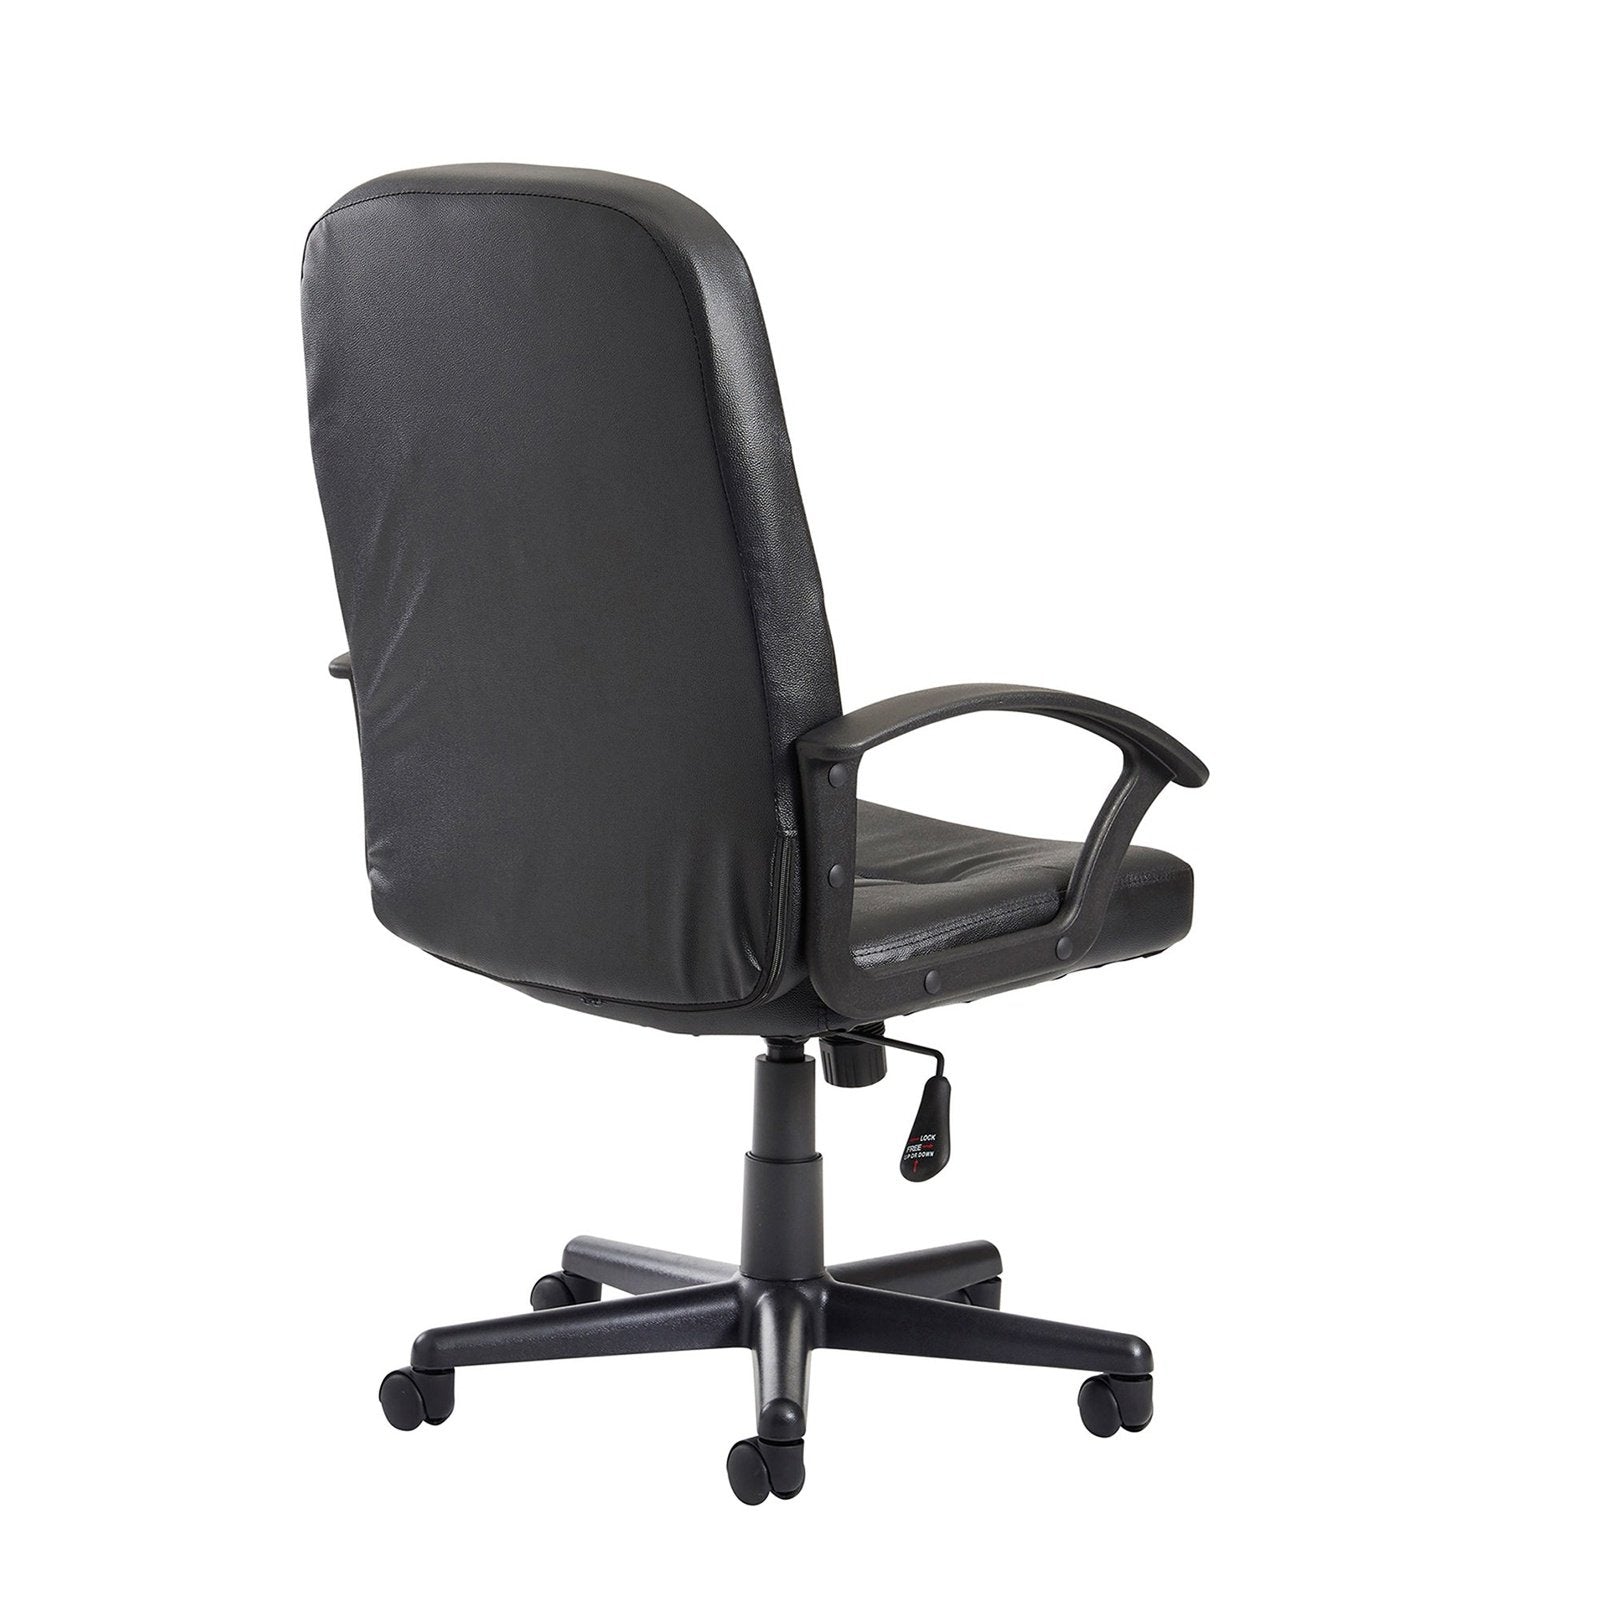 Cavalier high back managers chair - black leather faced - Office Products Online